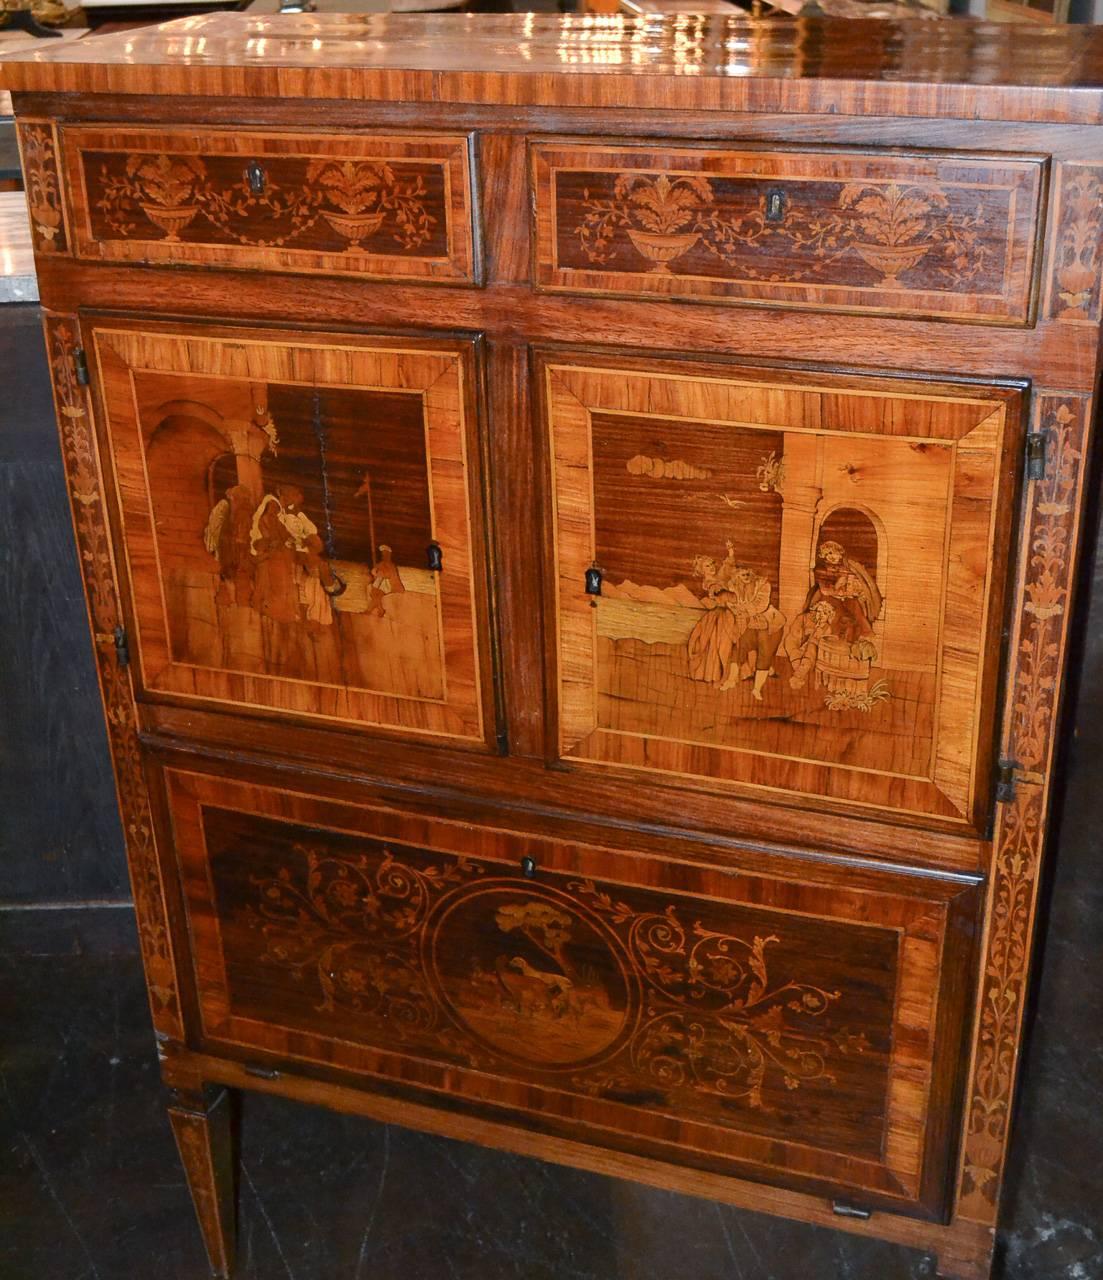 Splendid 19th century Italian Neoclassical cabinet with marquetry inlays.  Having wonderful inlaid figural scenes on doors and top, lovely marquetry motif overall, and resting on tapered legs.  Featuring clean lines and beautiful patina that would